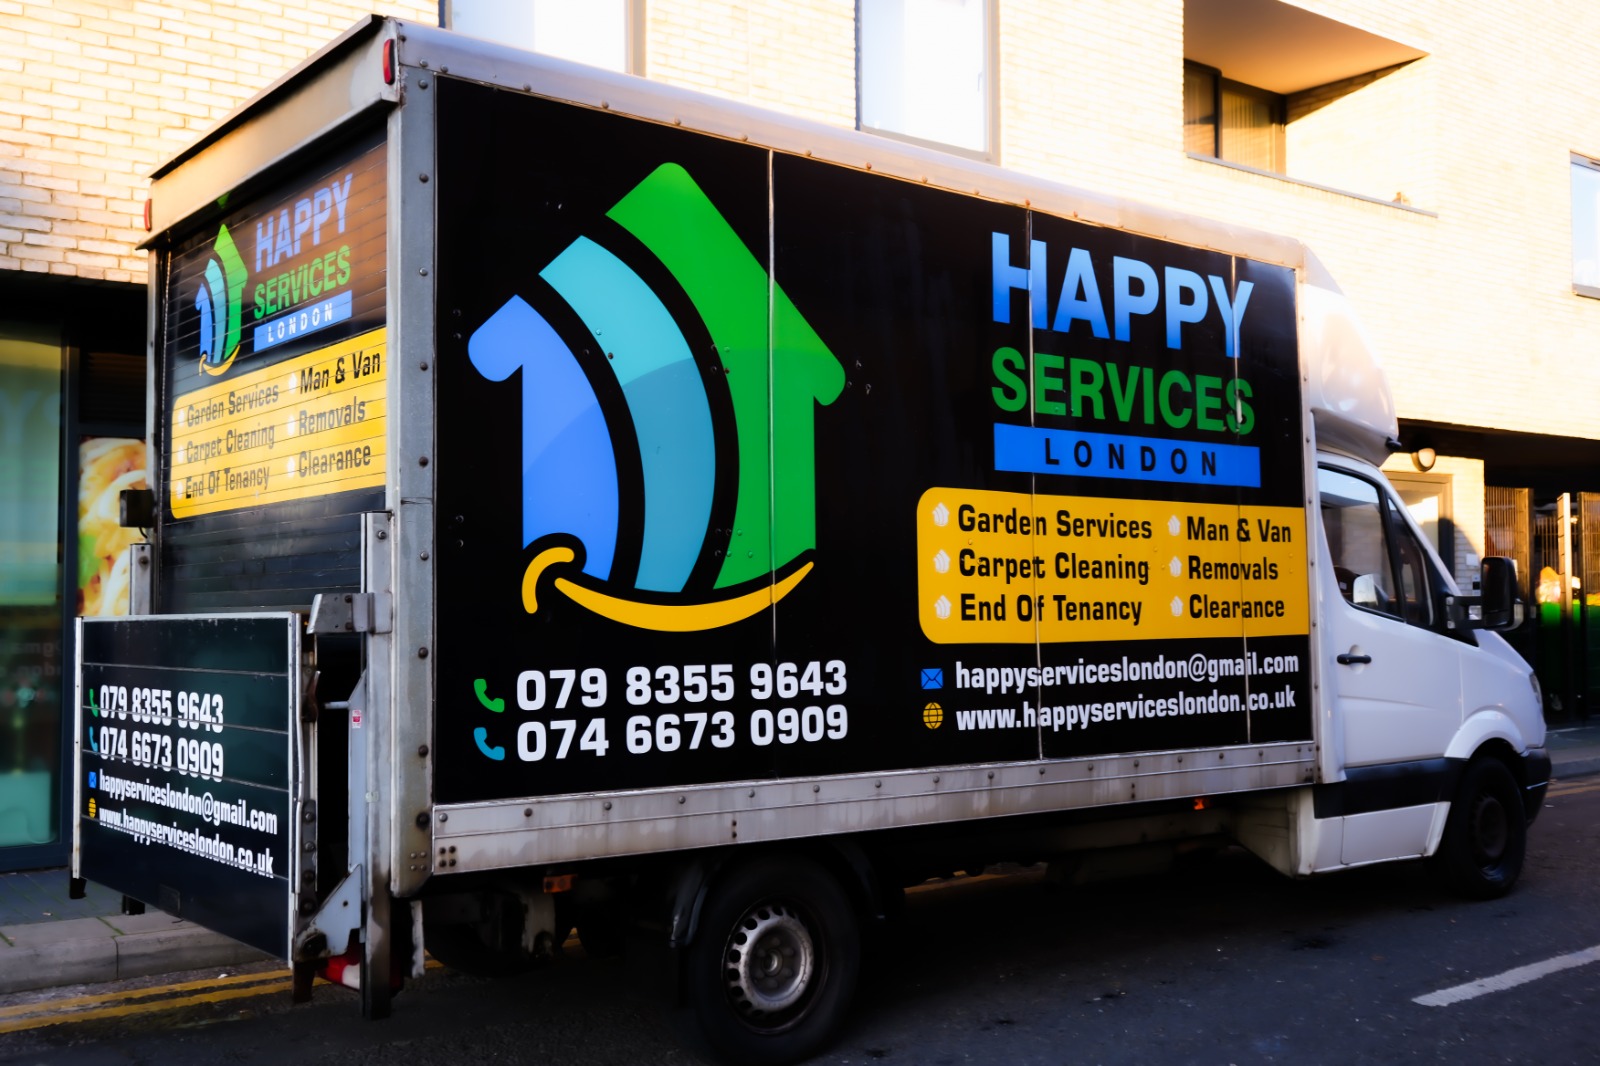 House clearance services by Happy Services London